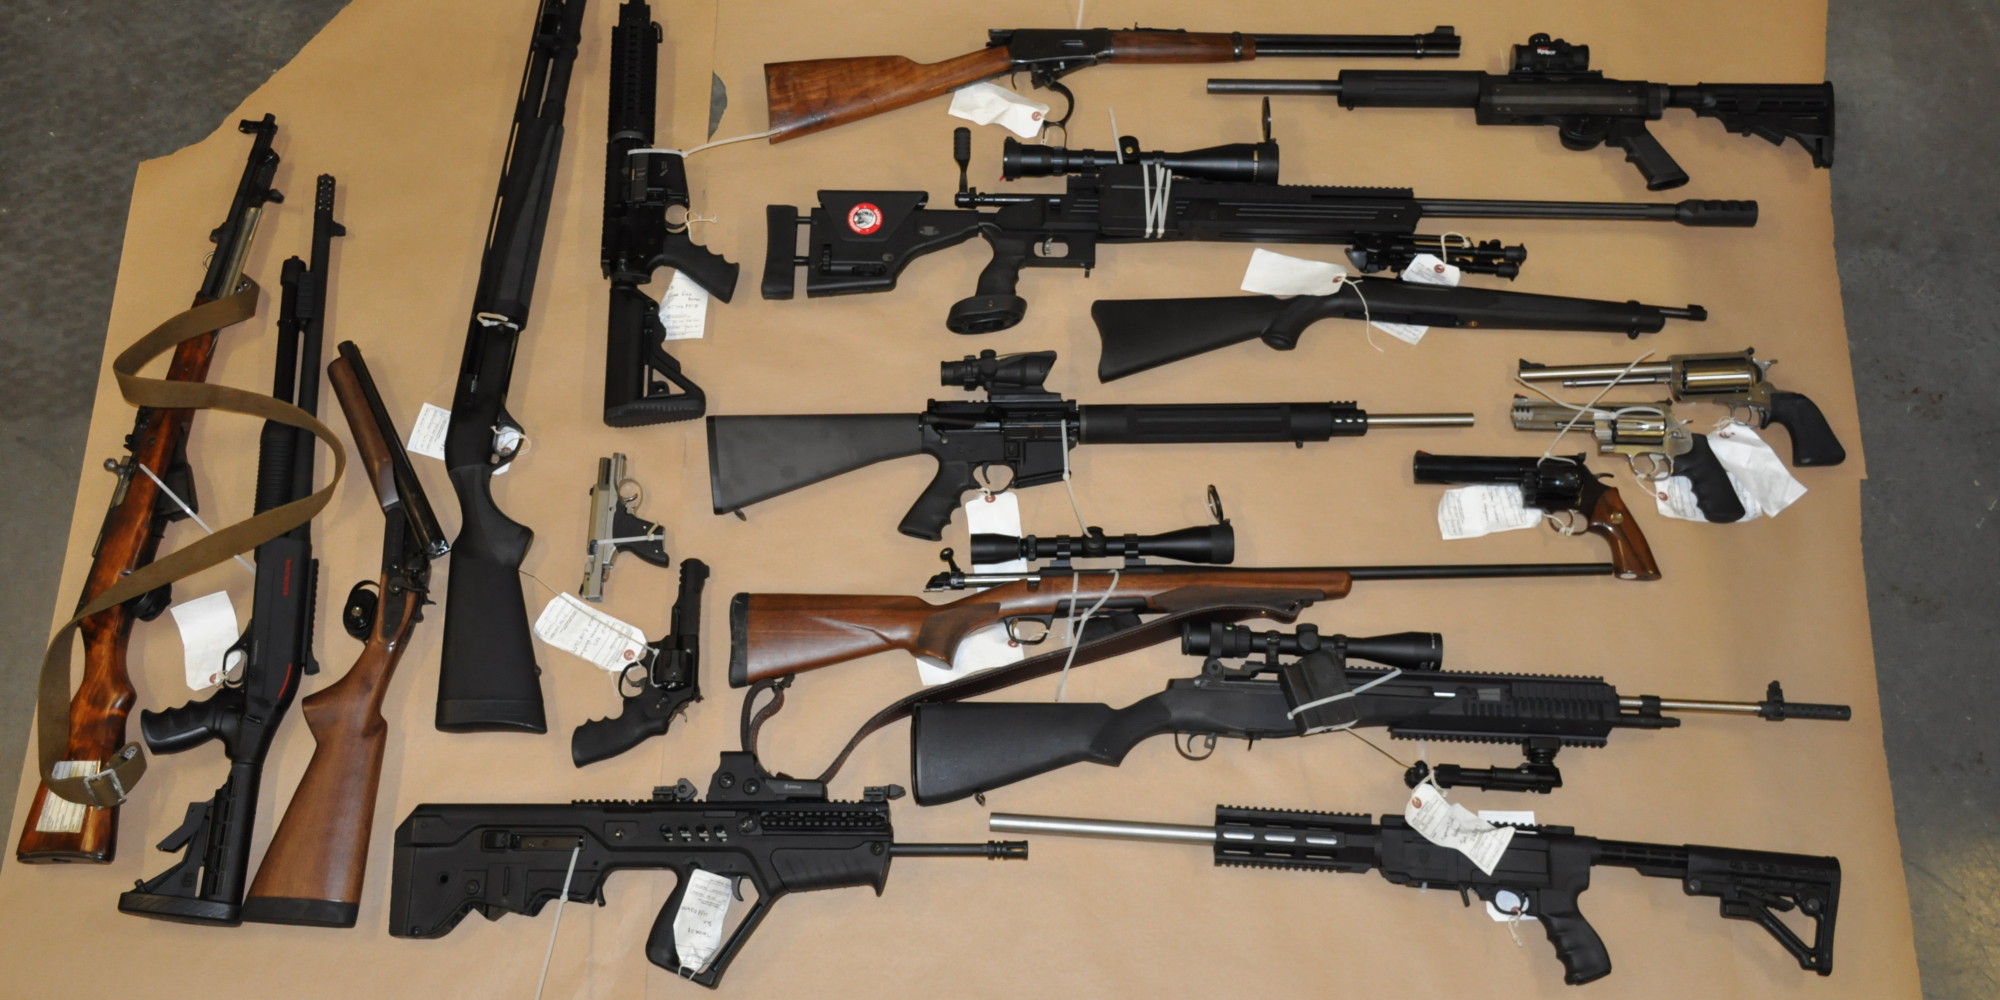 B.C. Guns: 19 Seized On Vancouver Island By Police